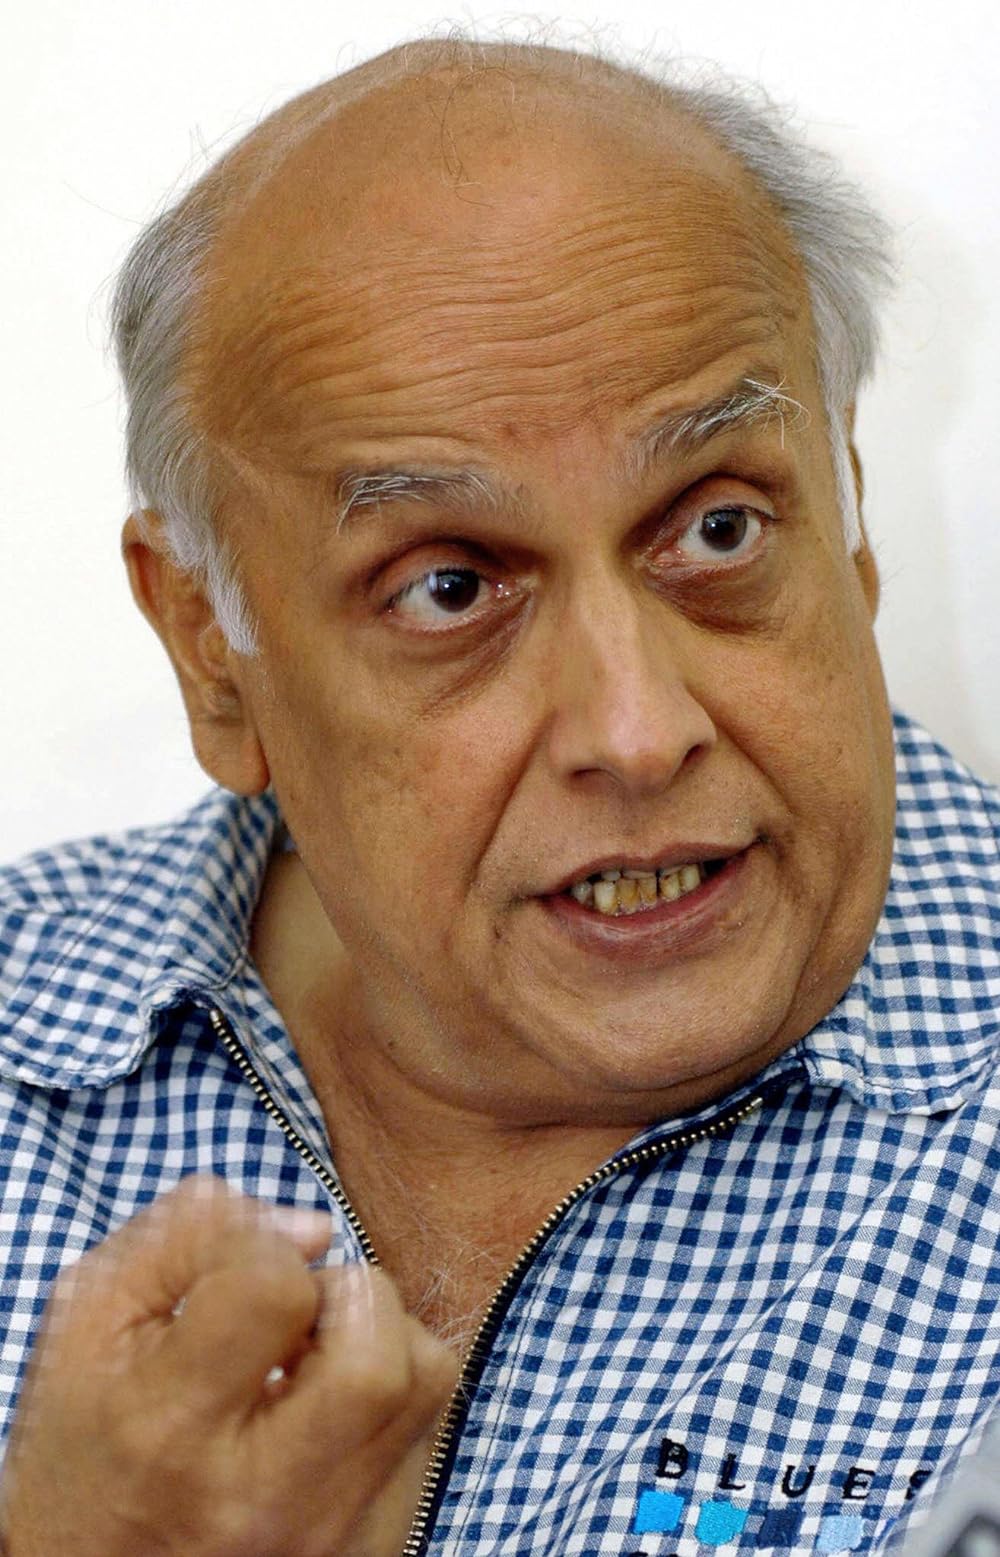 Mahesh Bhatt, known for his diverse filmmaking, ventured into both arthouse and commercial cinema. His repertoire includes impactful films like 